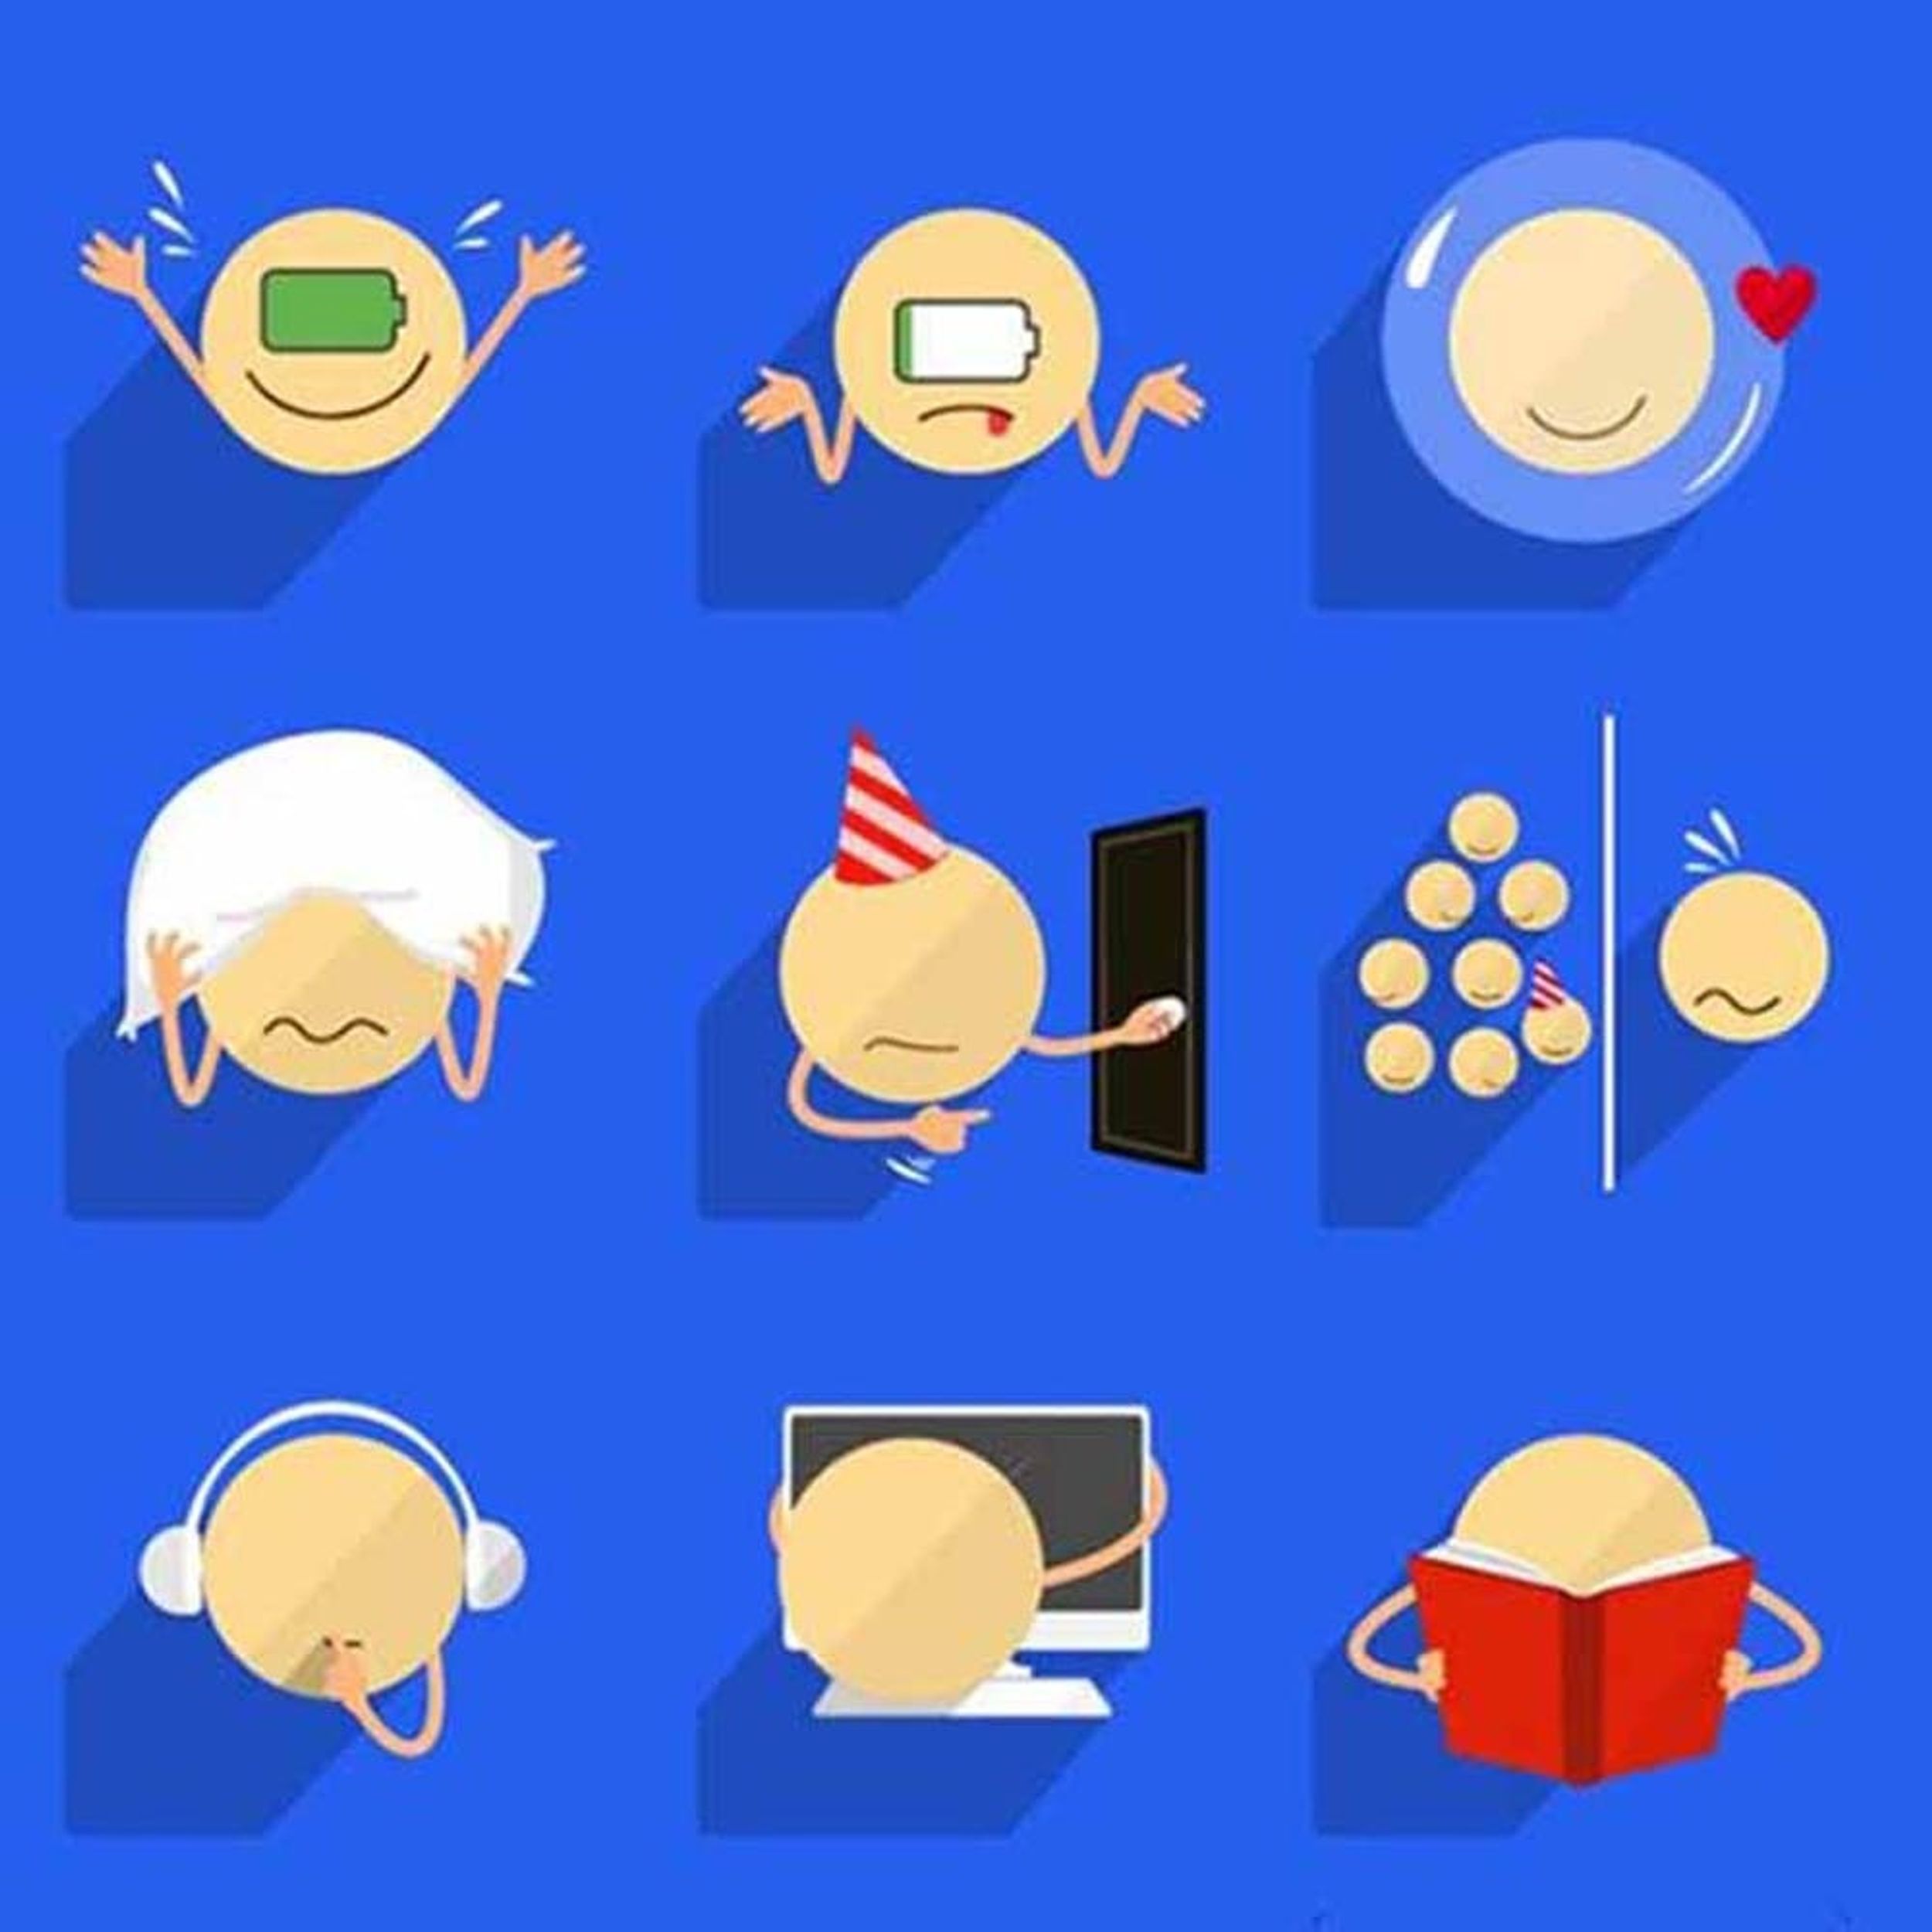 Introverts, There’s Now Emoji to Express Your Feelings